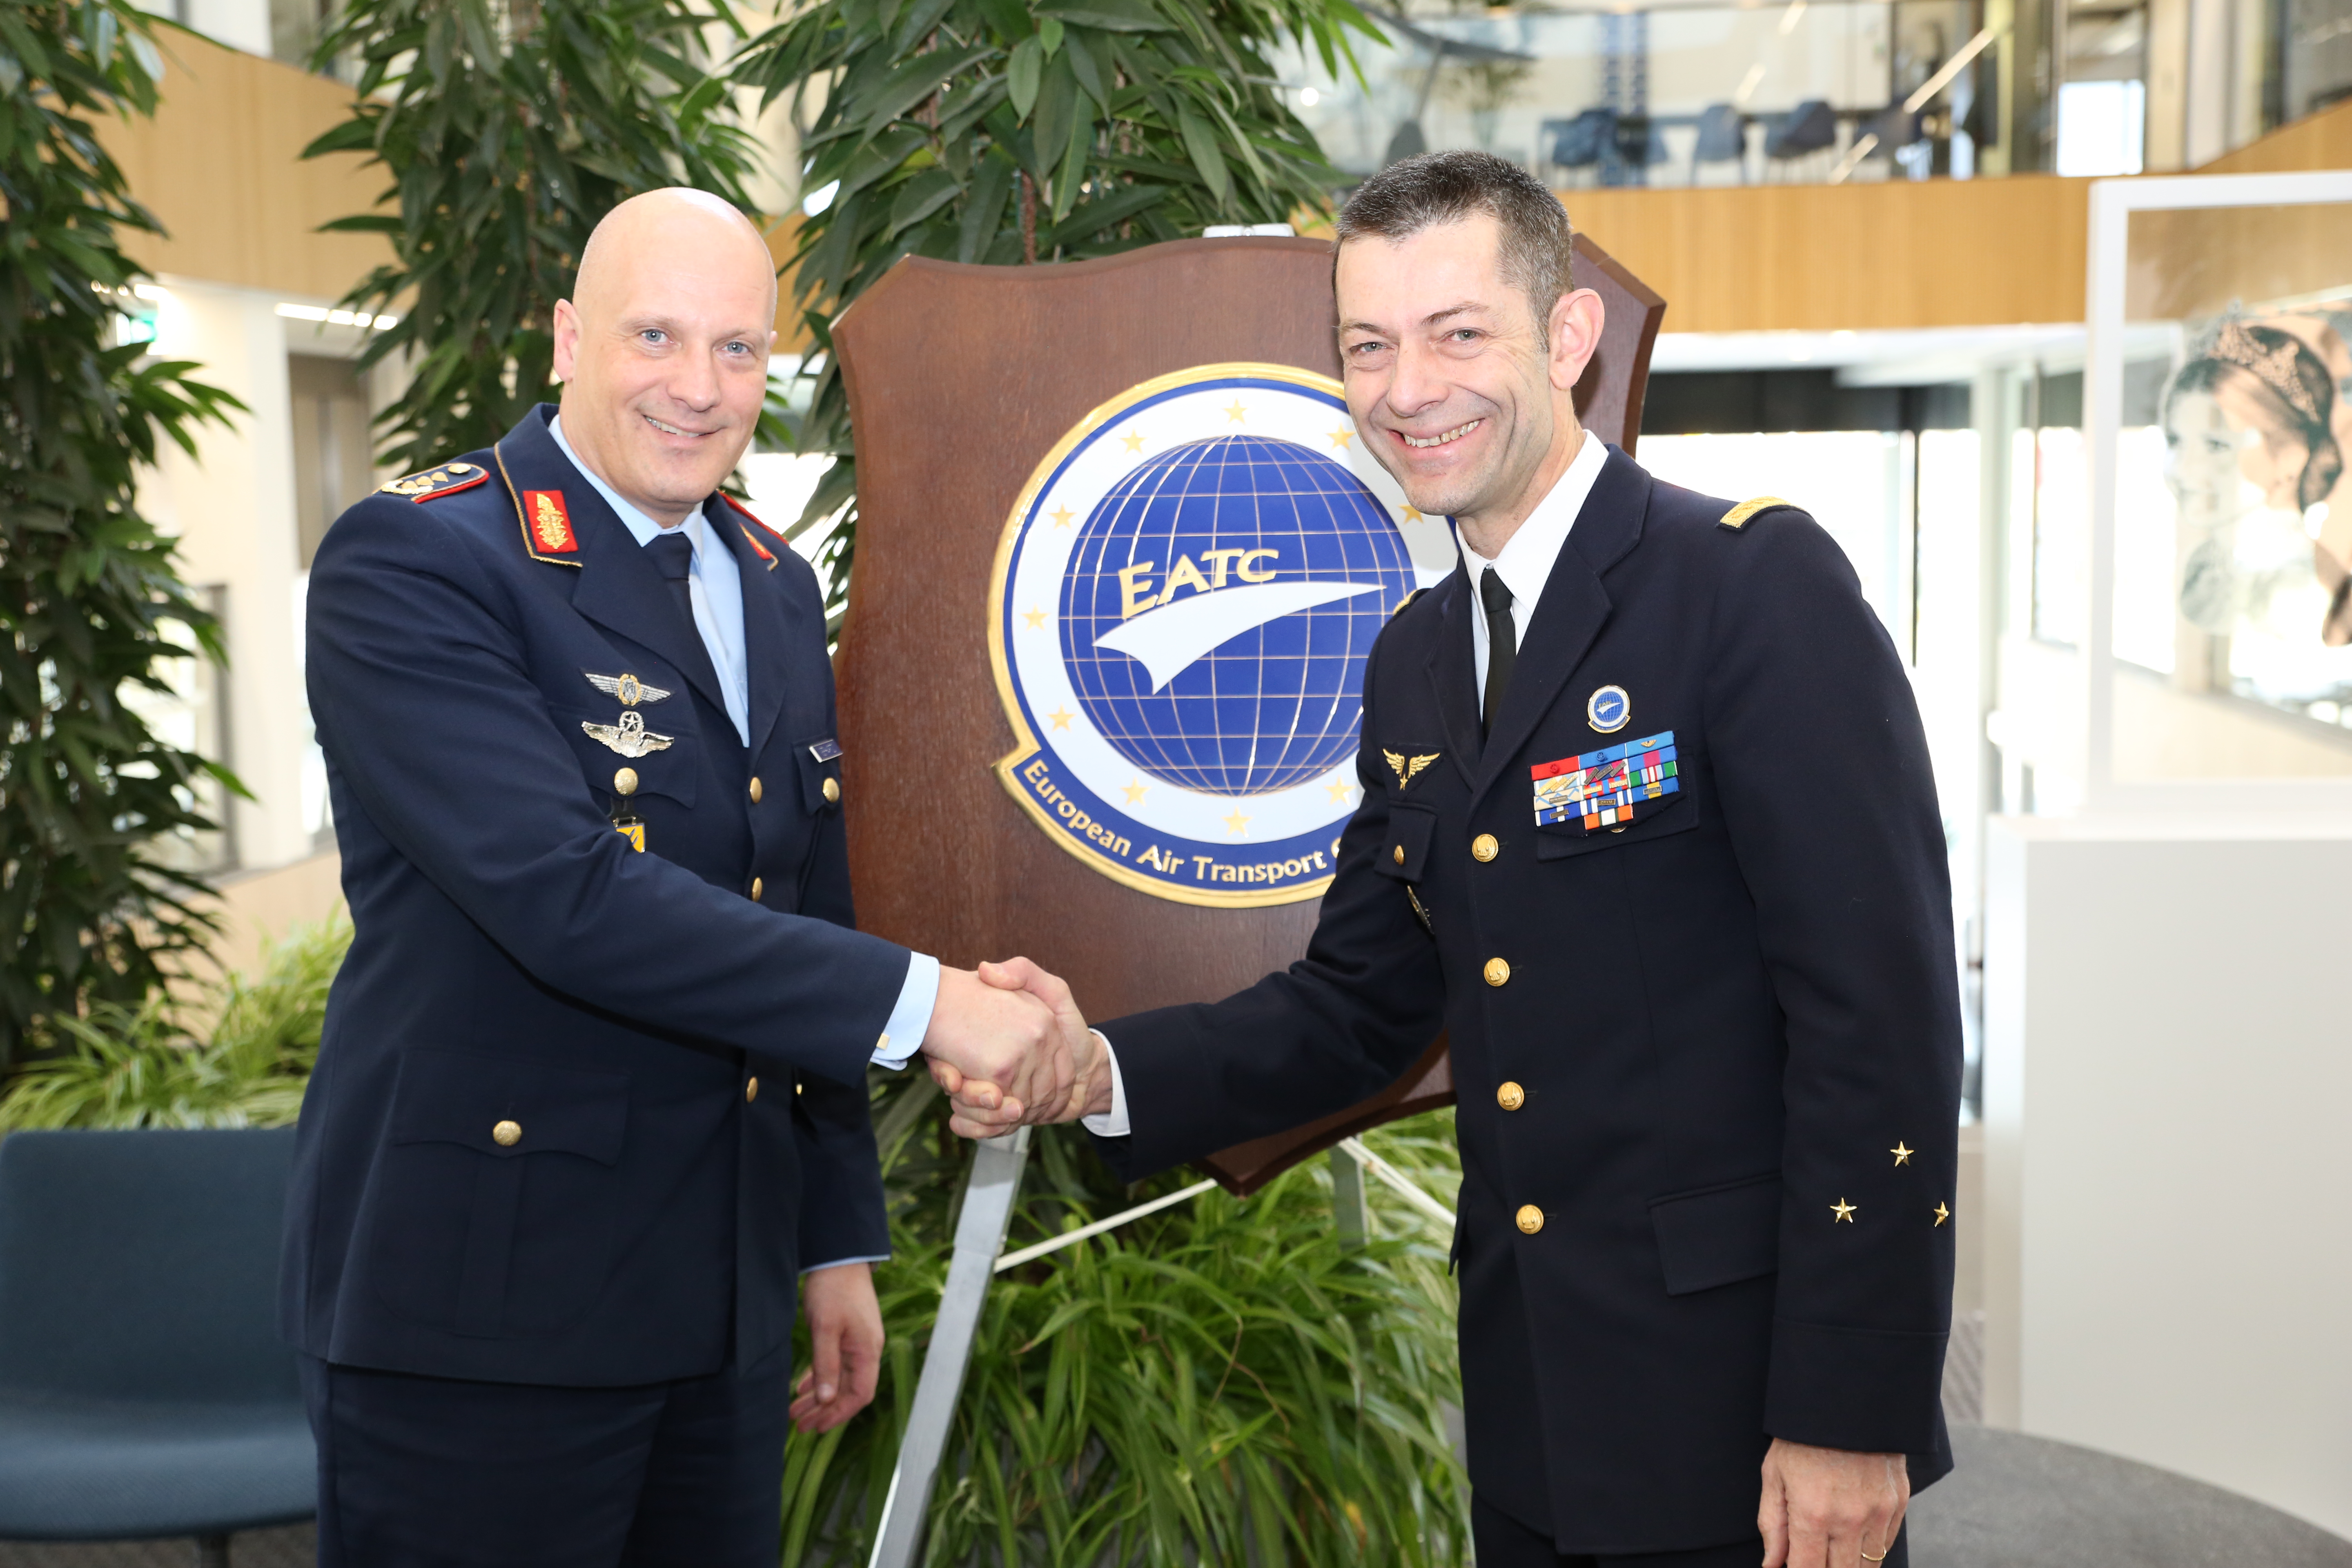 The Chief of Staff of the German Air Force visits EATC.